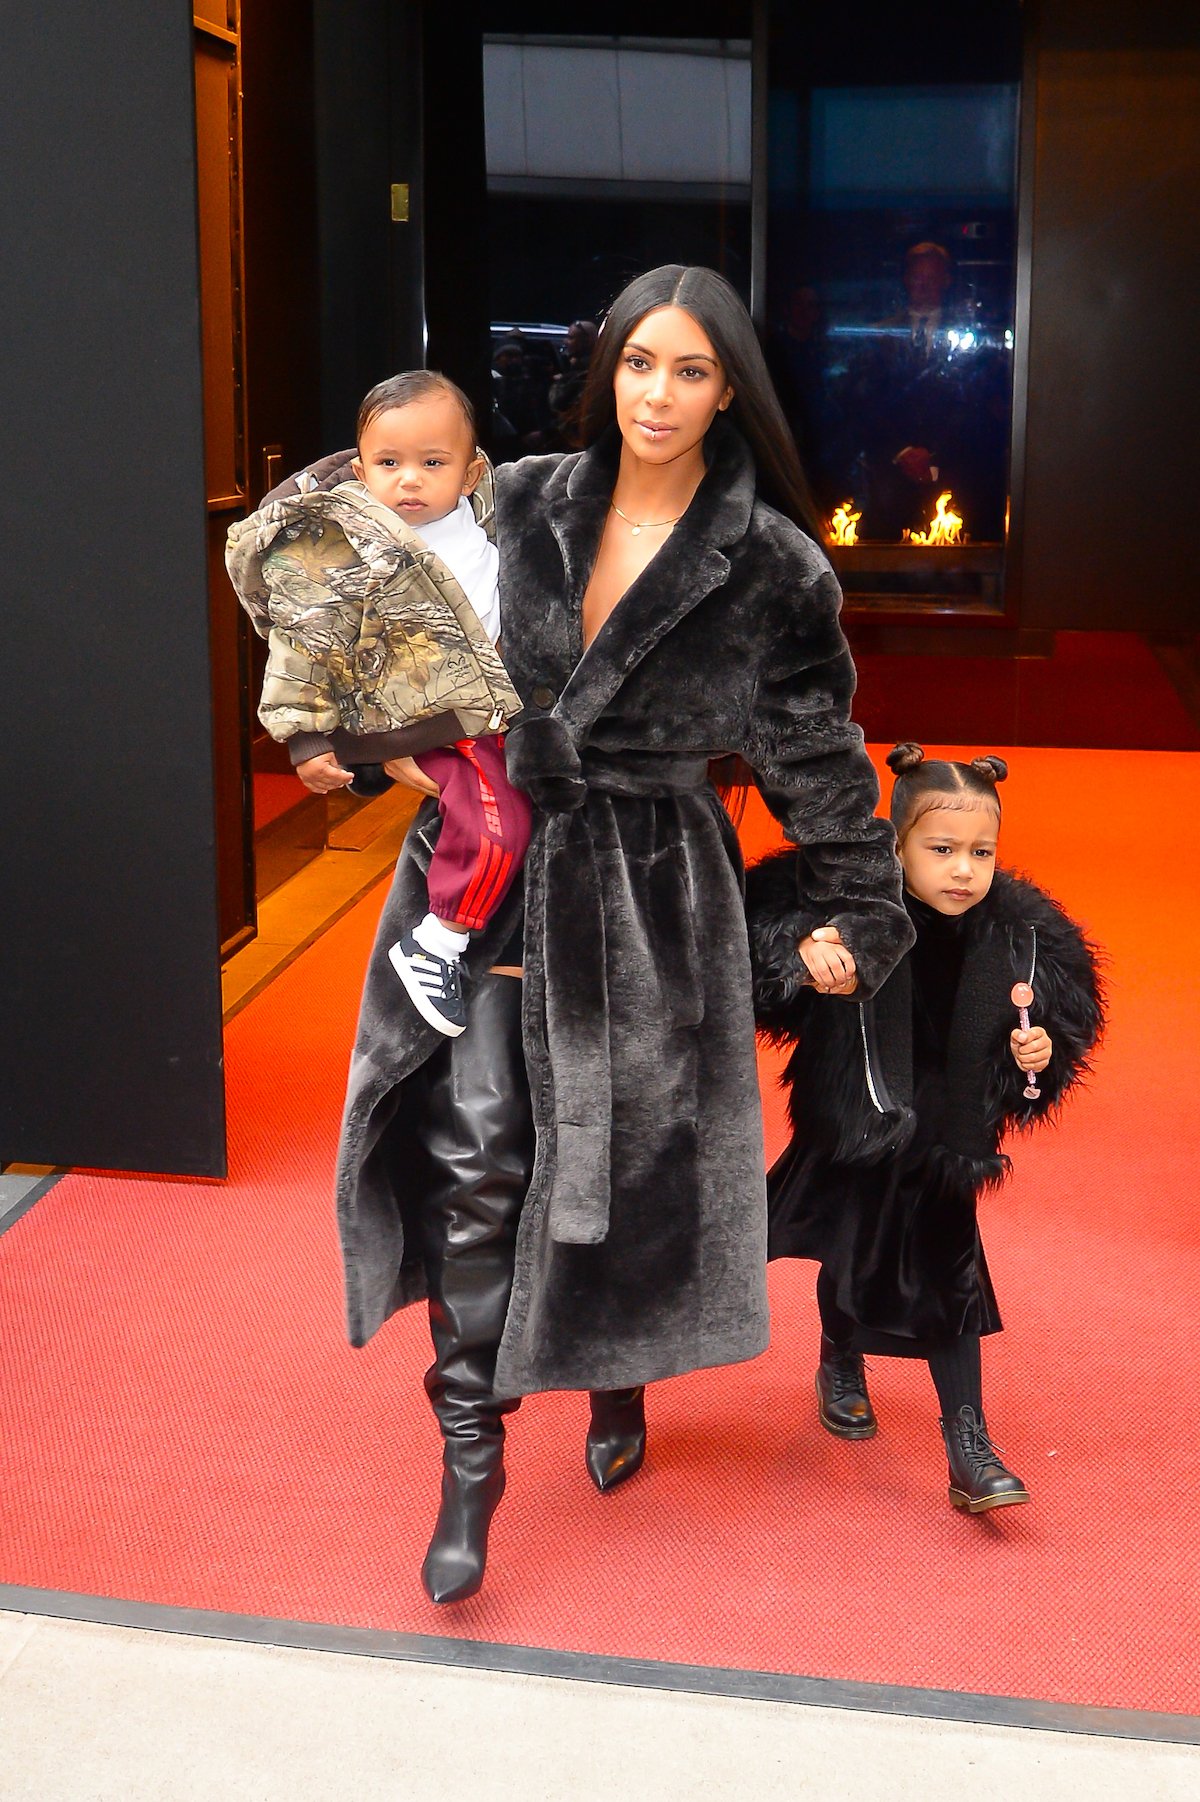 Kim Kardashian, wearing a long black coat, holds son Saint West in one arm while guiding daughter North West with the other.